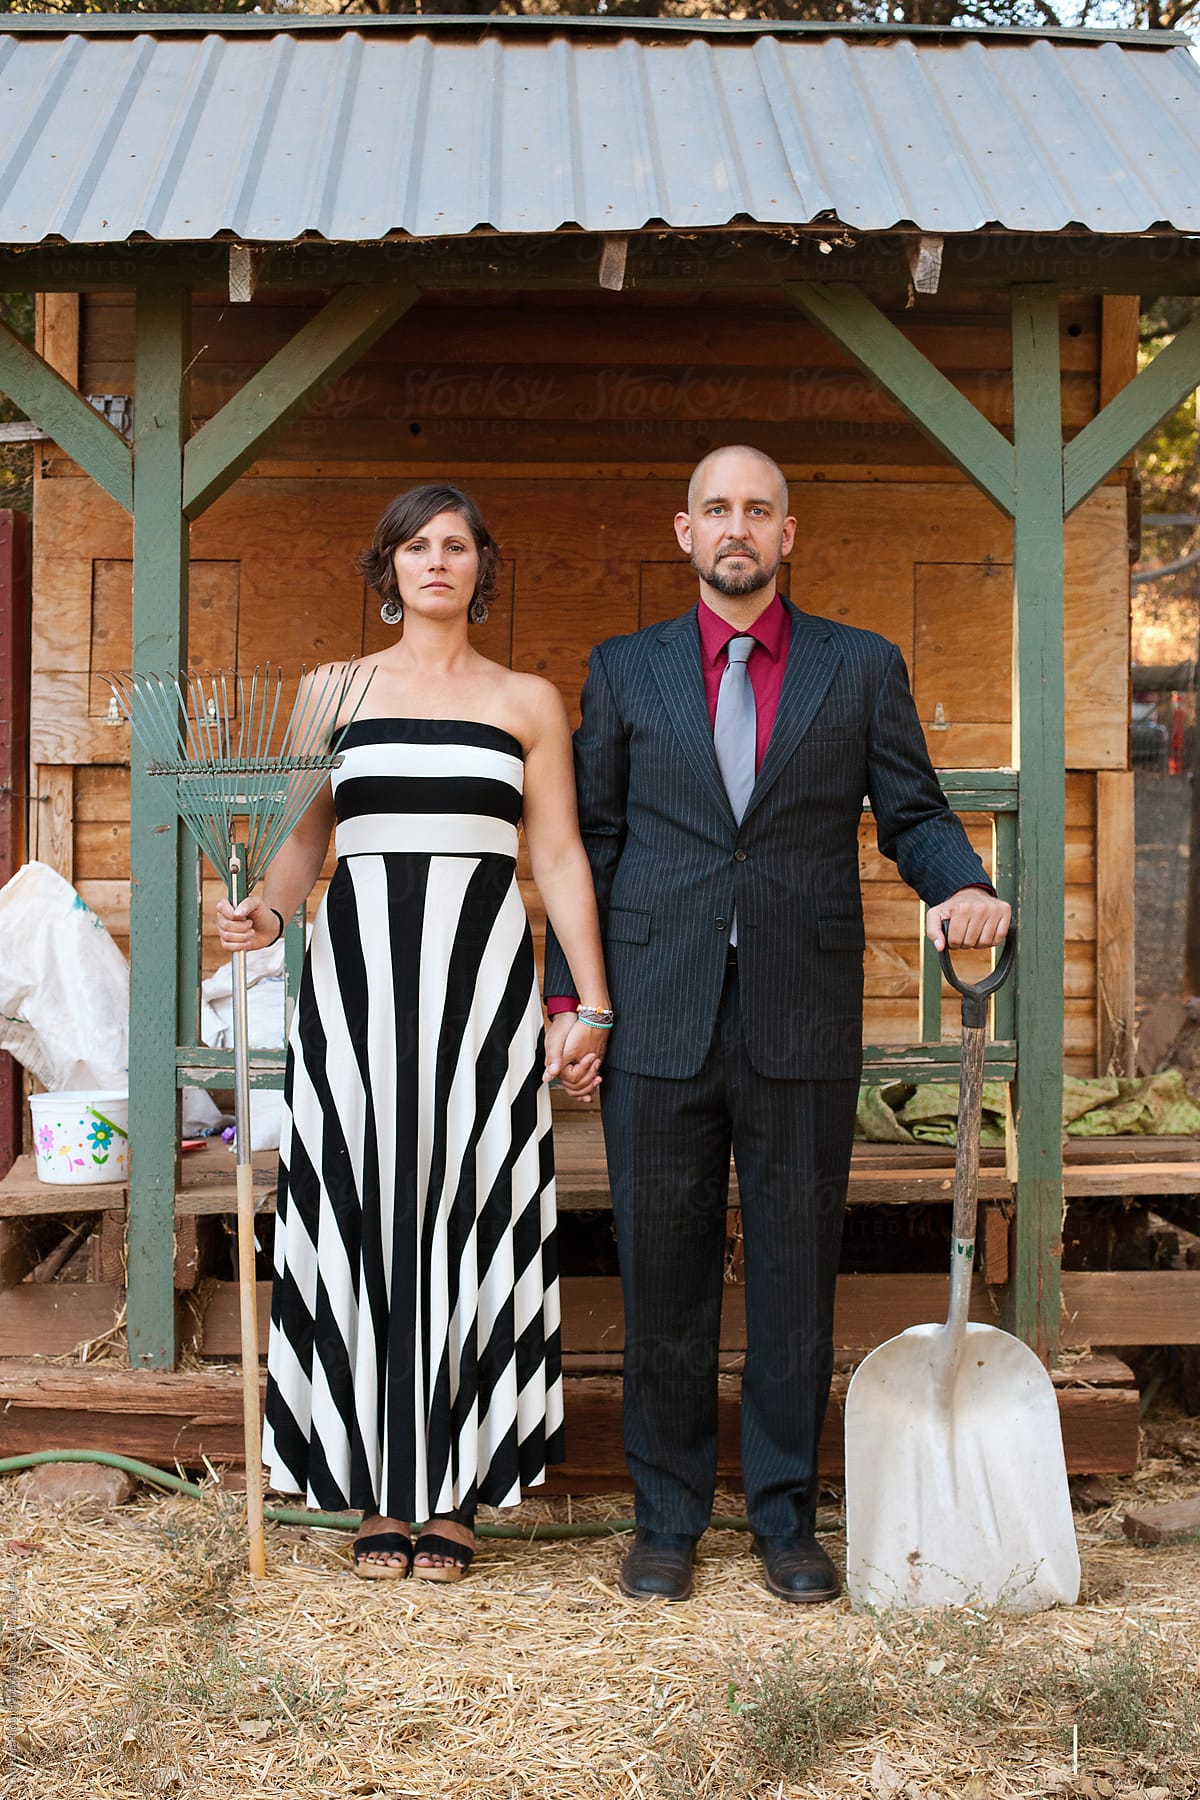 Woman and man in formal attire holding farm implements in front of chicken coop